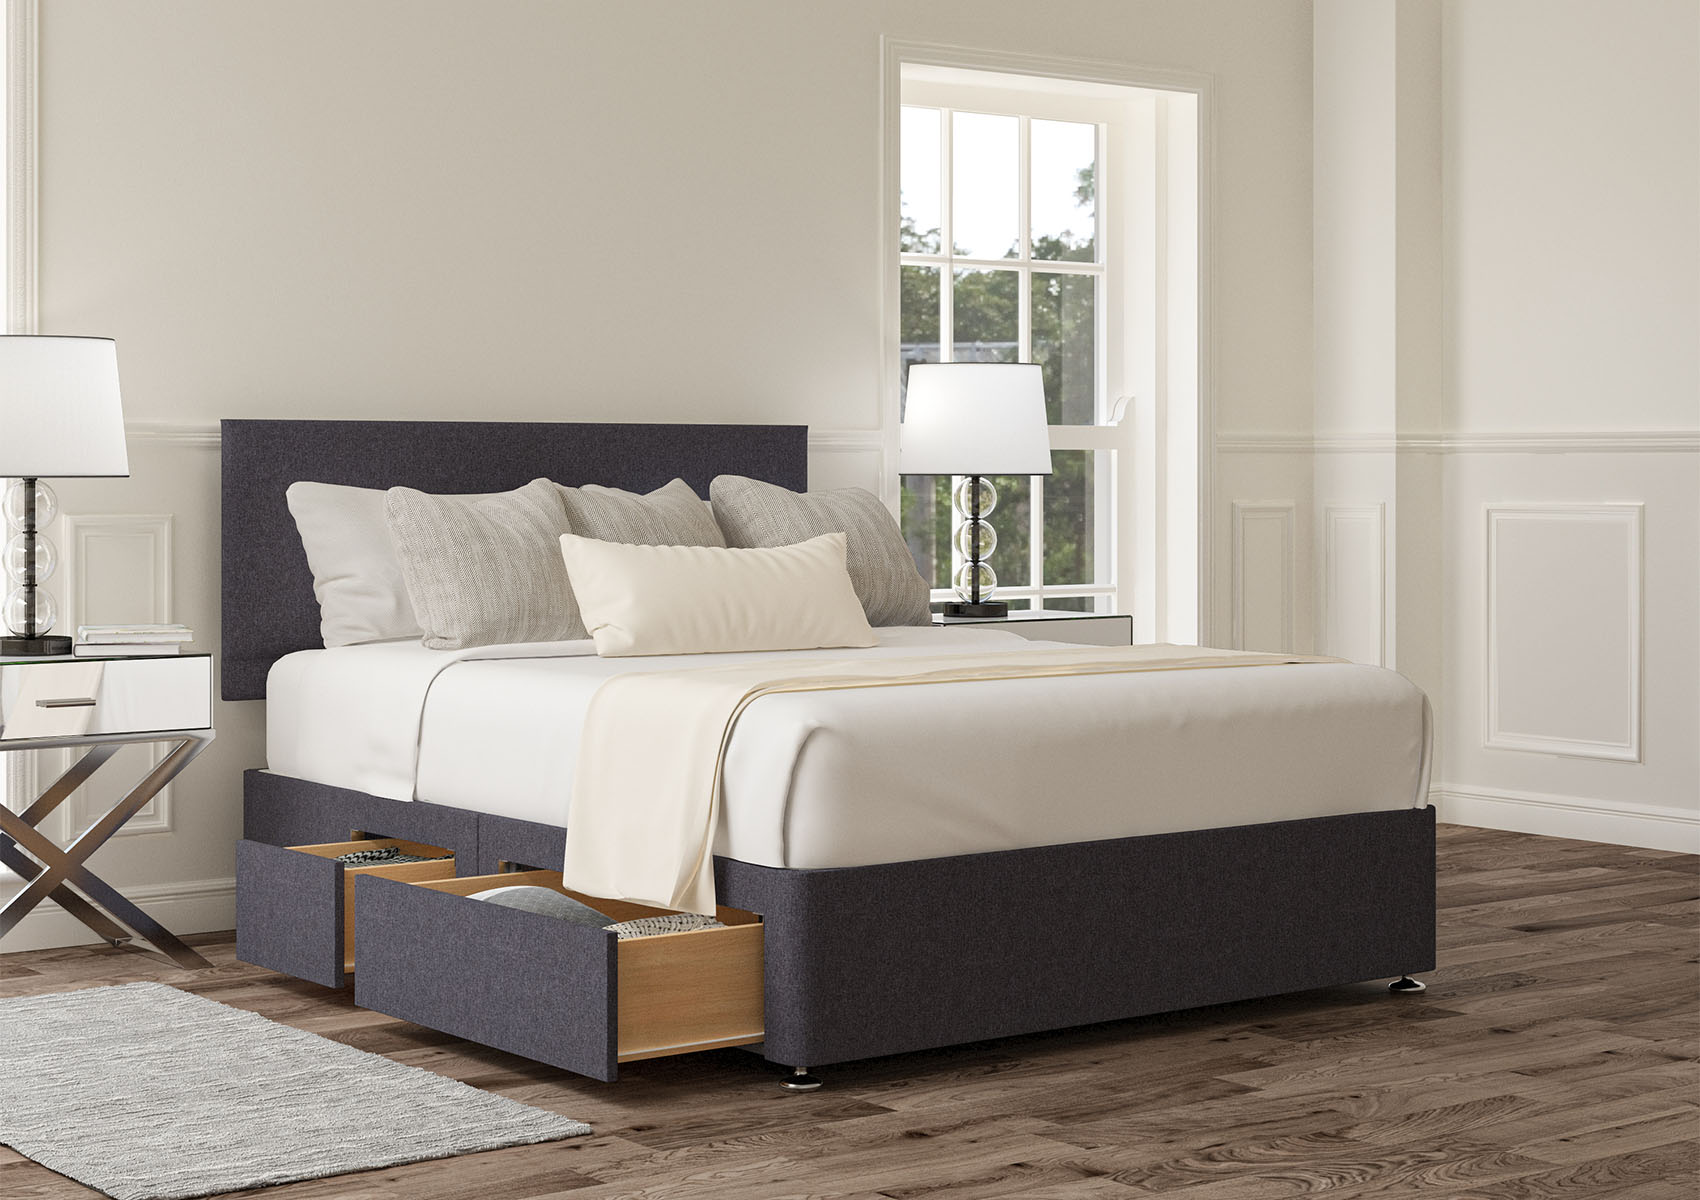 View Henley Plush Steel Upholstered King Size Divan Bed Time4Sleep information